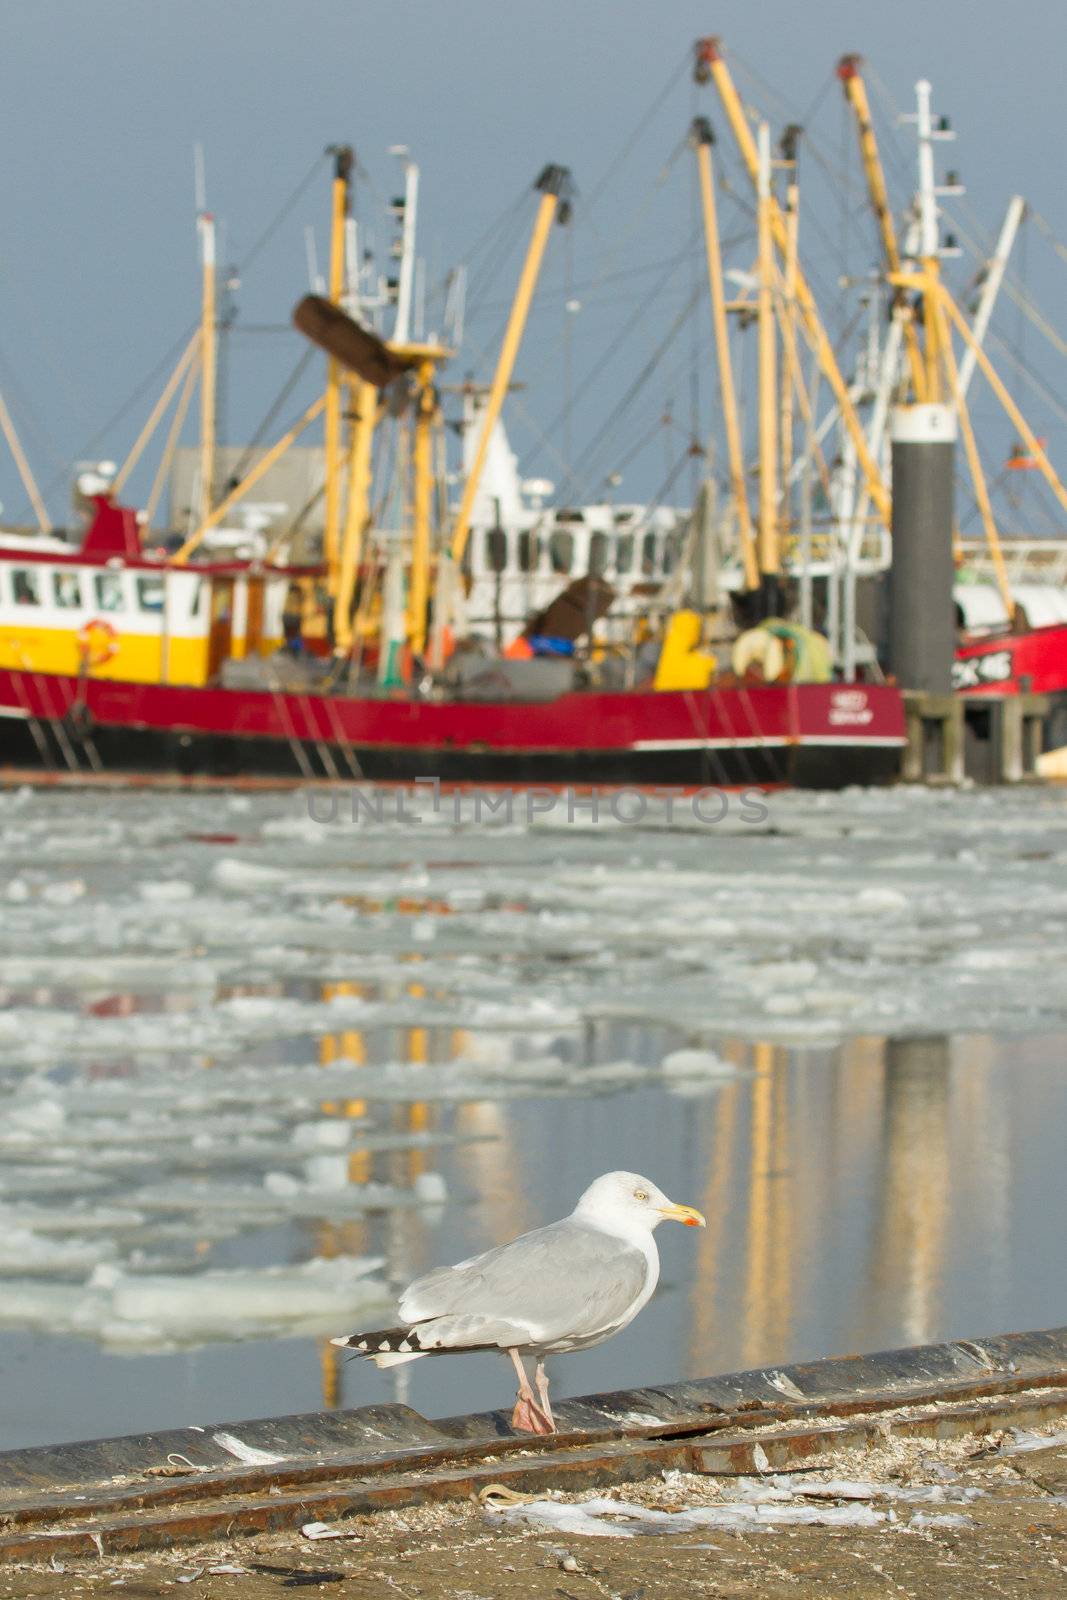 A herring gull with a fishing boat on the background